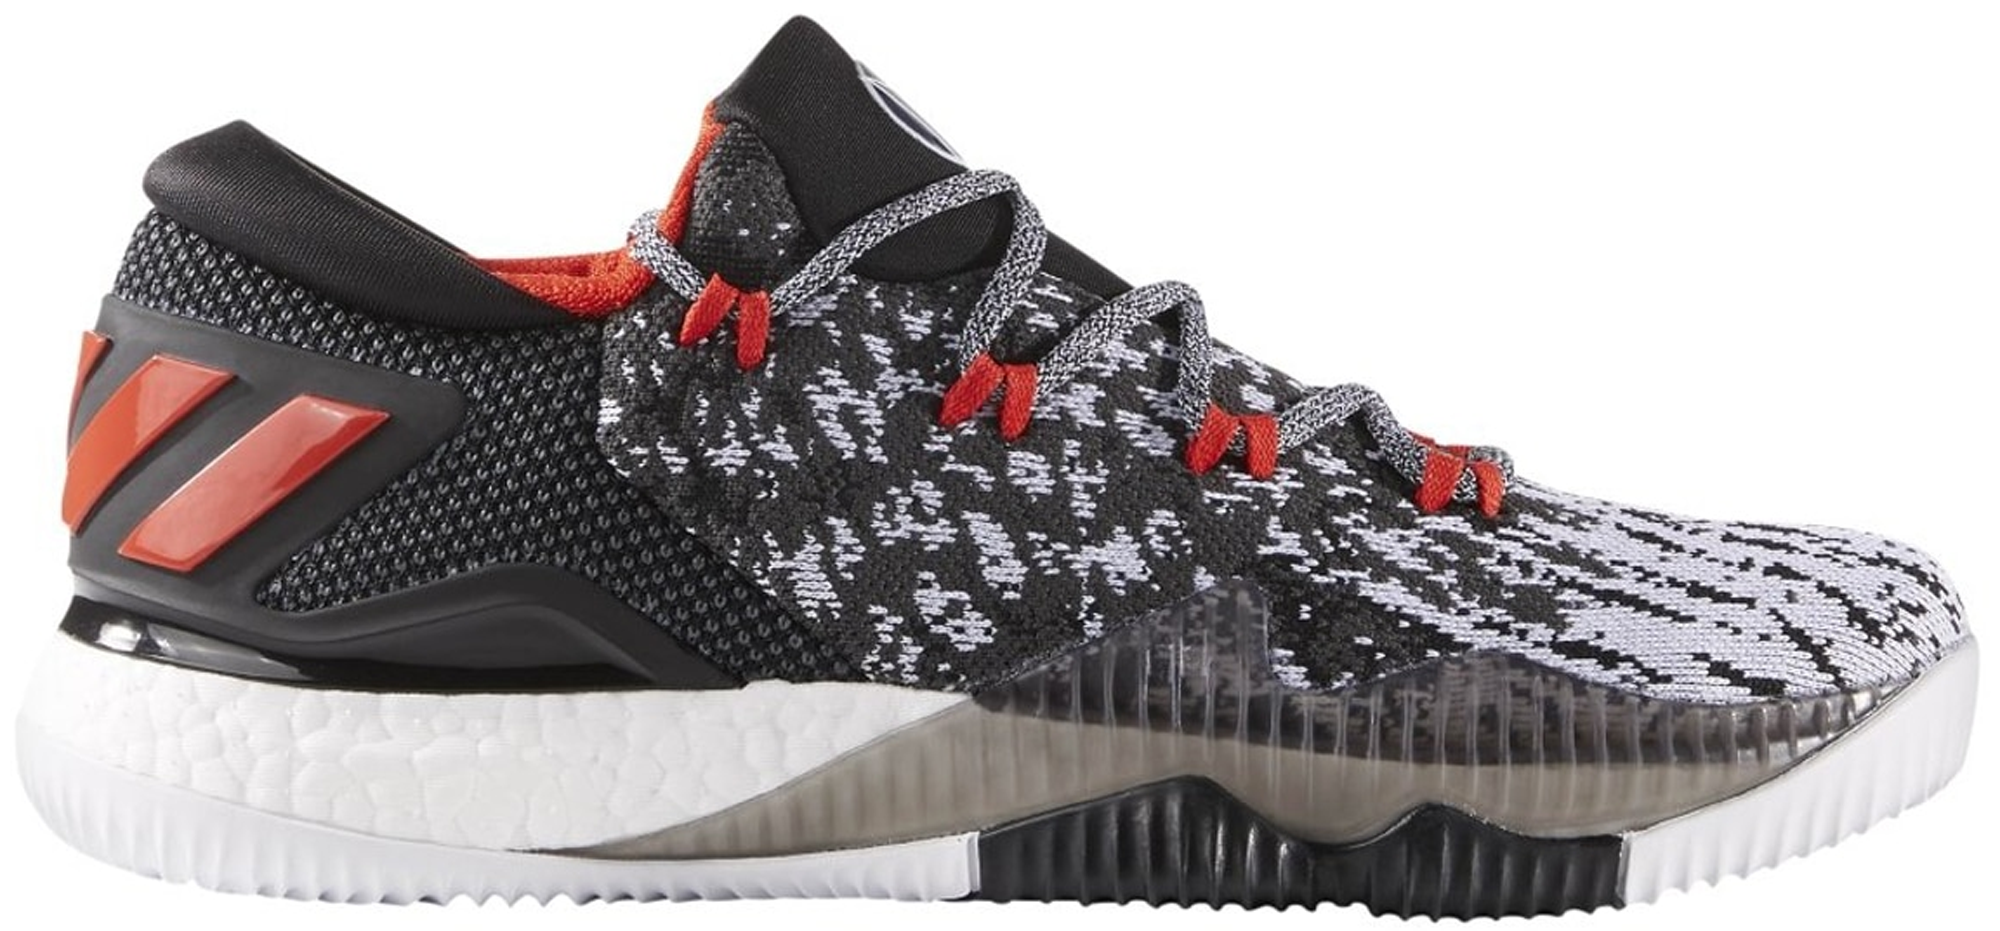 adidas Crazylight Boost Low 2016 